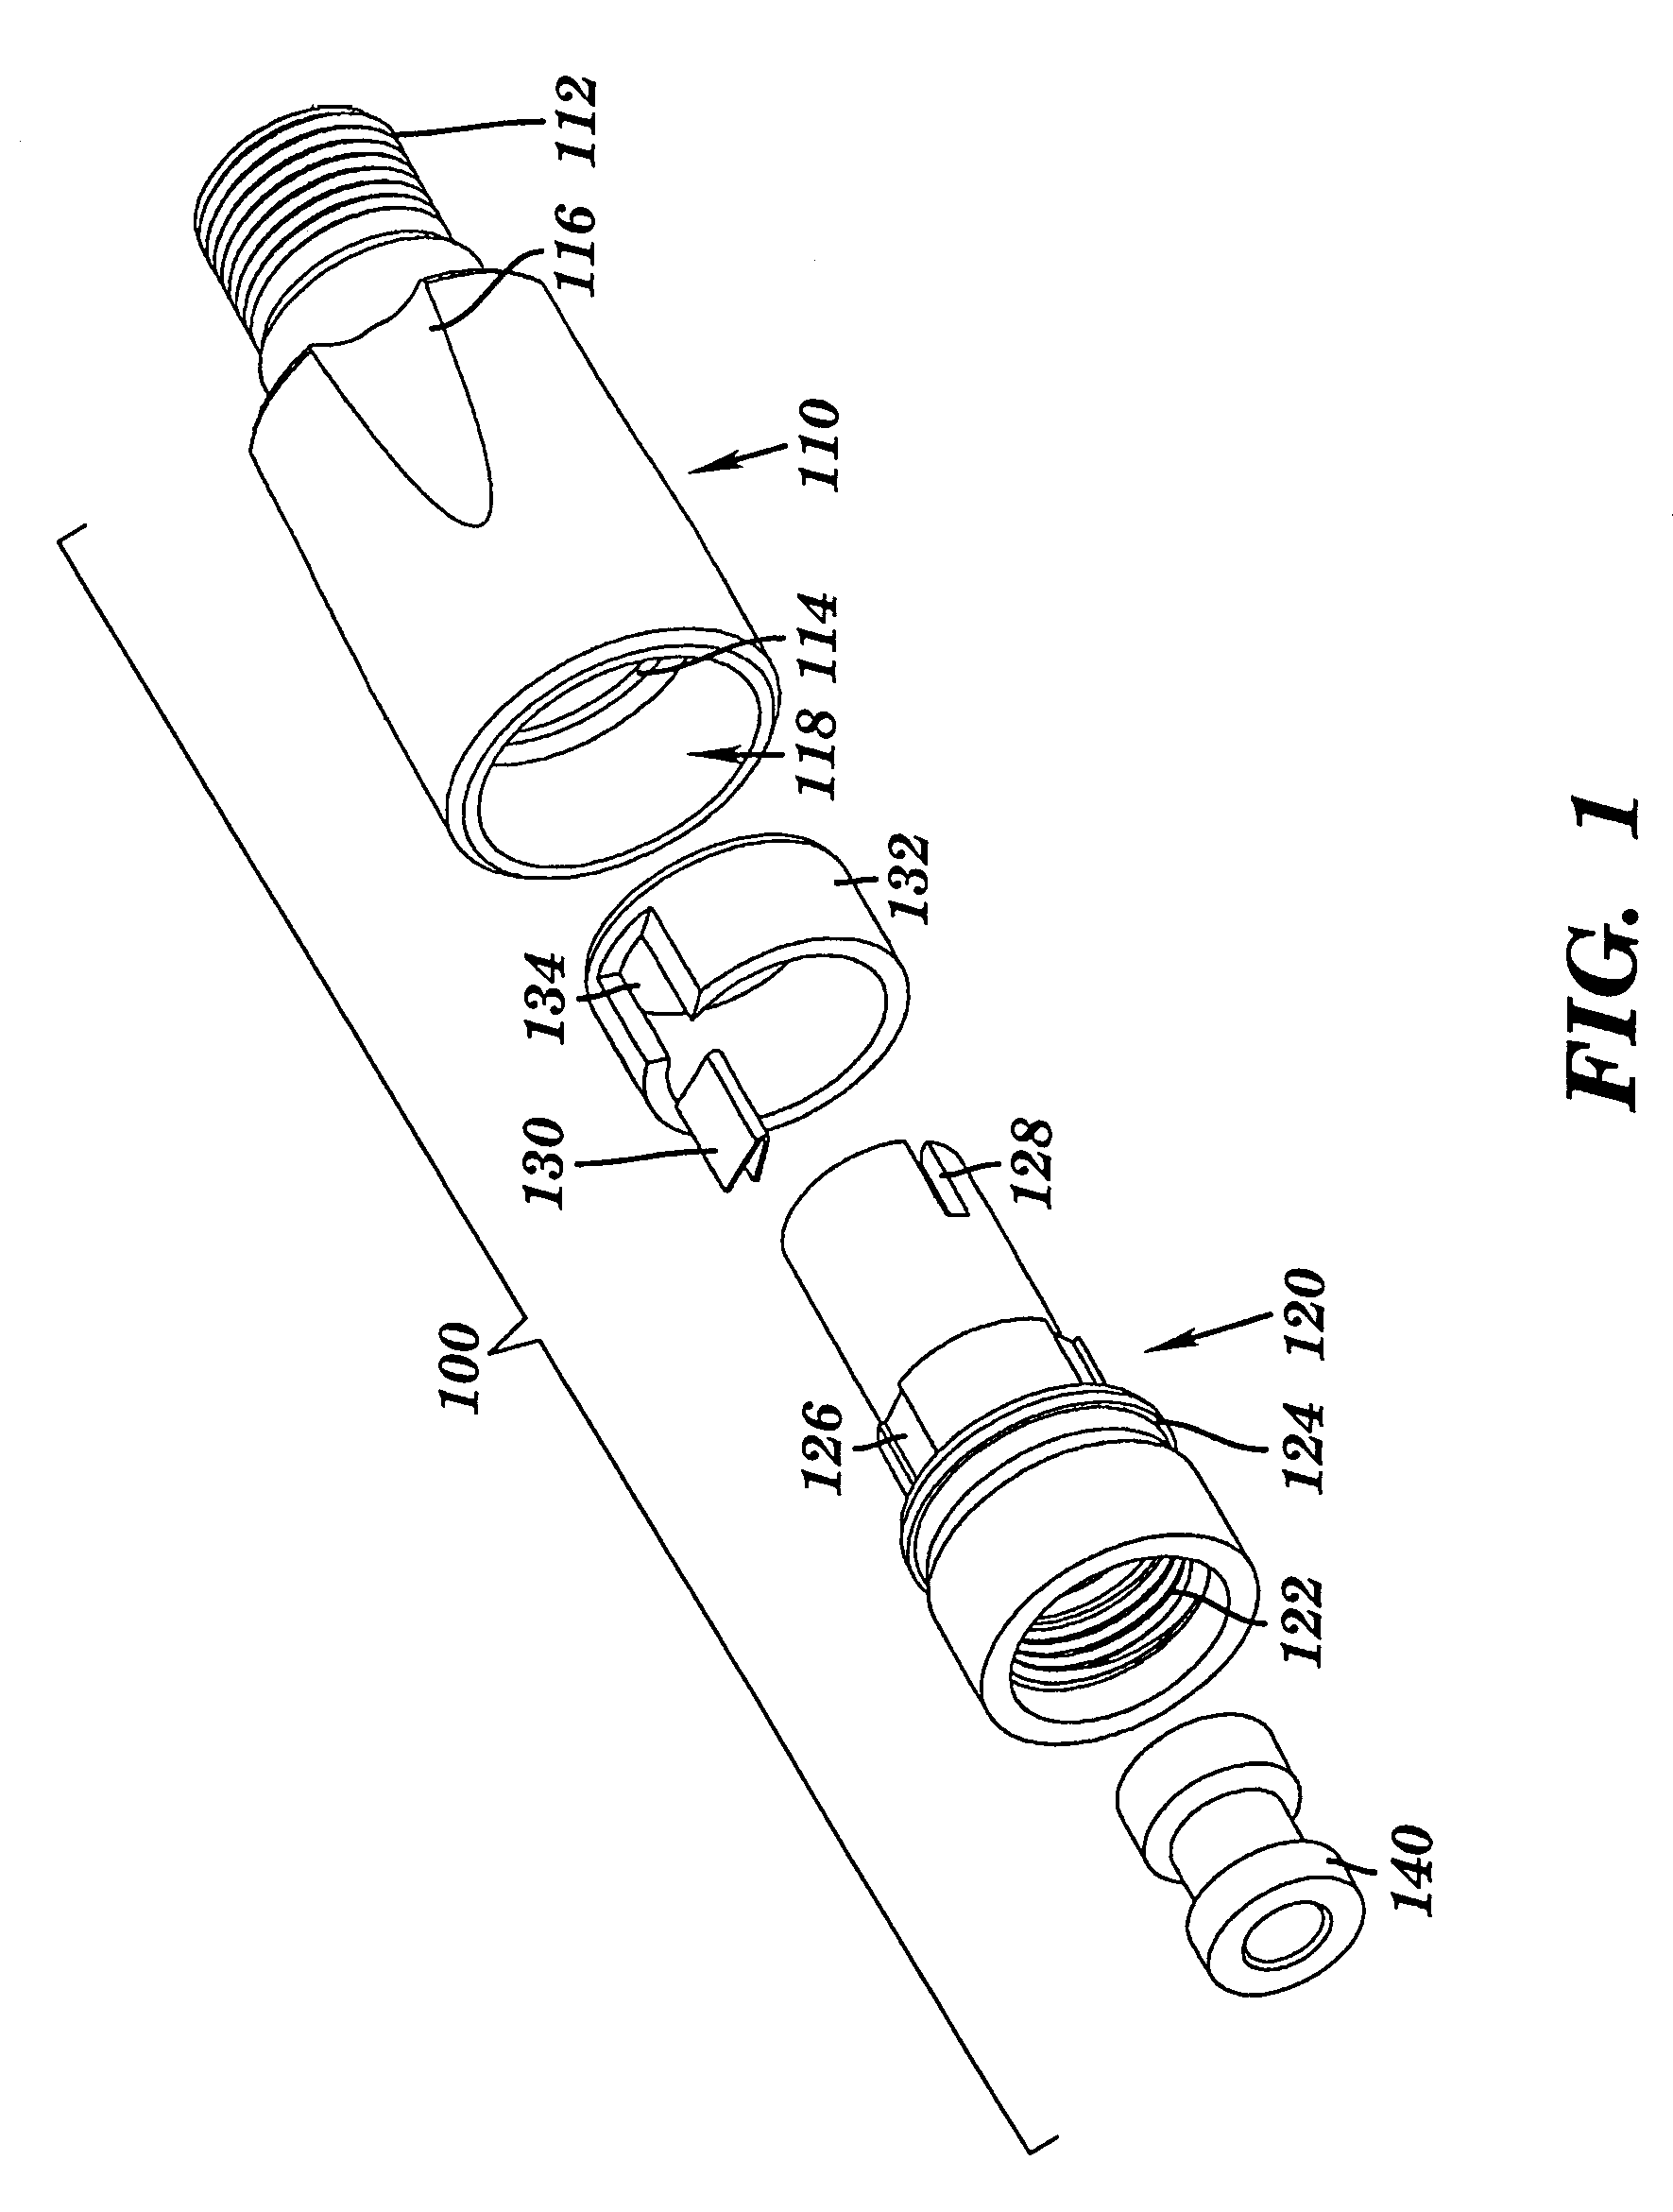 Coaxial cable port security device and method of use thereof